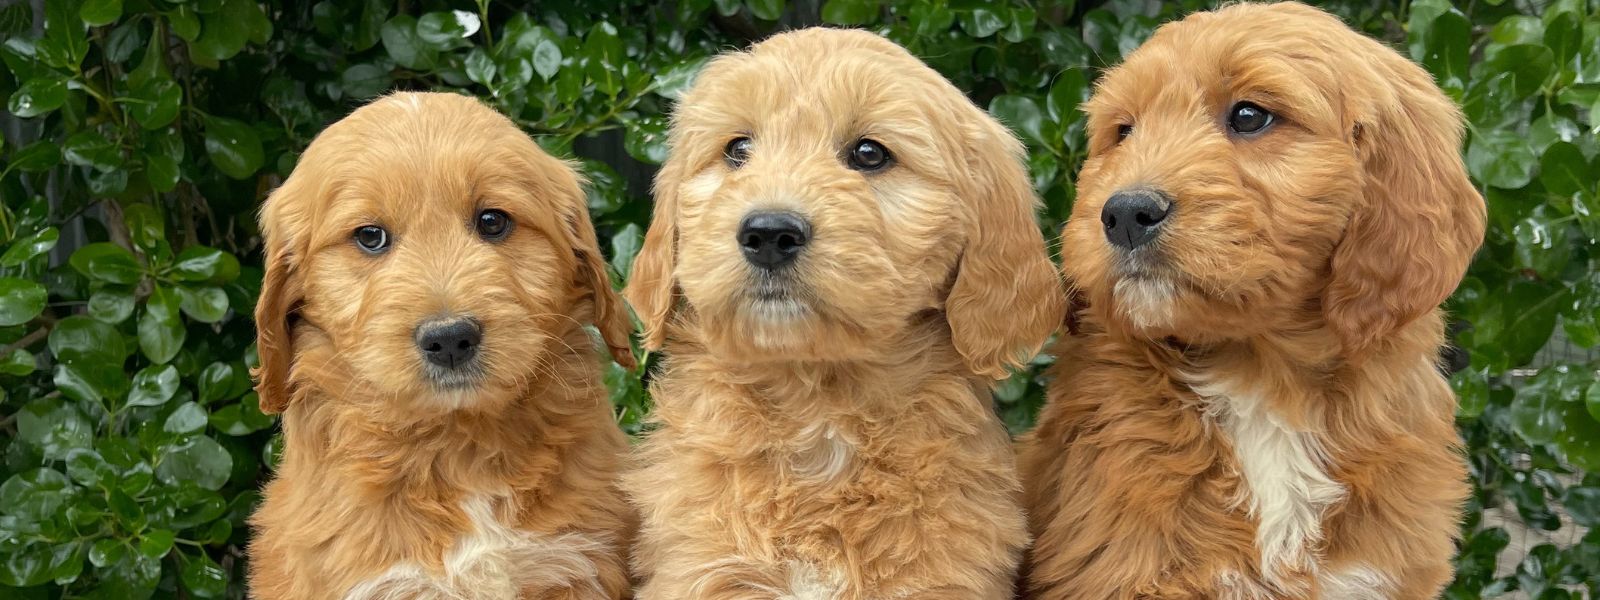 Groodle Puppies for Sale Melbourne